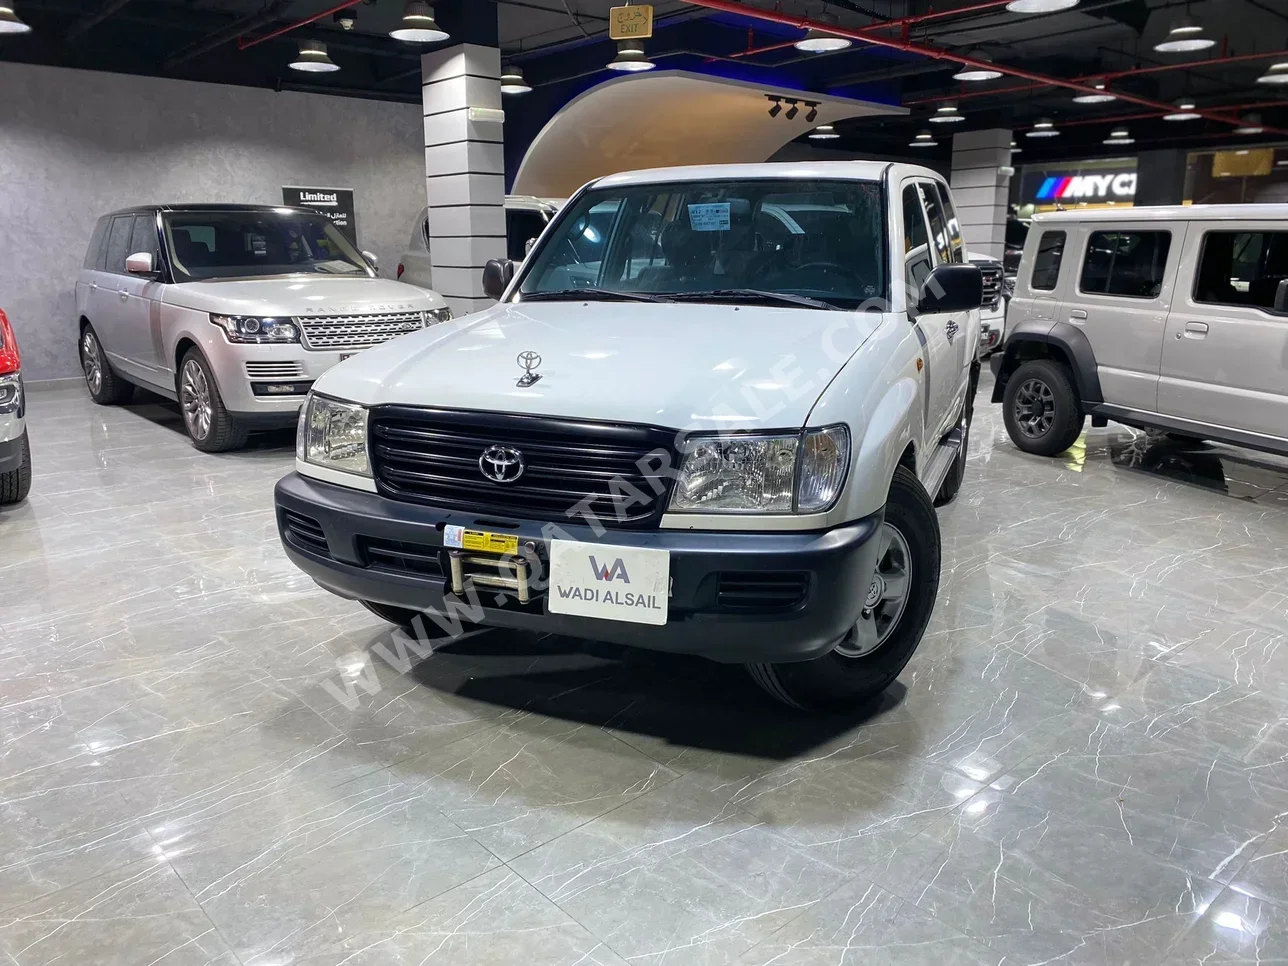 Toyota  Land Cruiser  G  2005  Automatic  220٬000 Km  6 Cylinder  Four Wheel Drive (4WD)  SUV  White